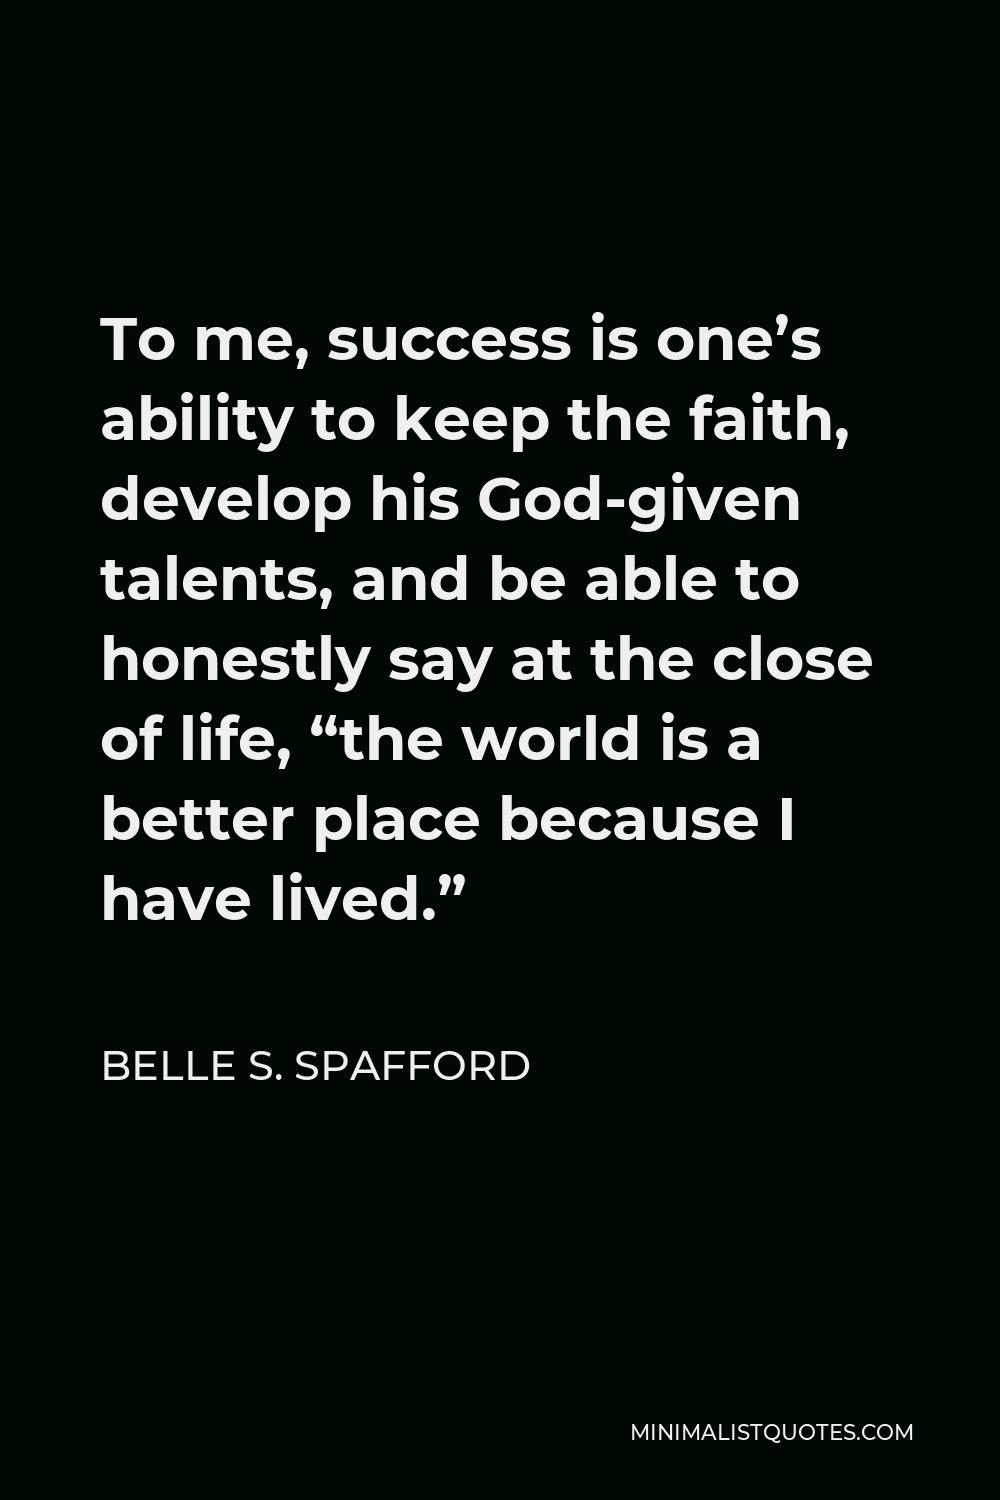 Belle S. Spafford Quote - To me, success is one’s ability to keep the faith, develop his God-given talents, and be able to honestly say at the close of life, “the world is a better place because I have lived.”